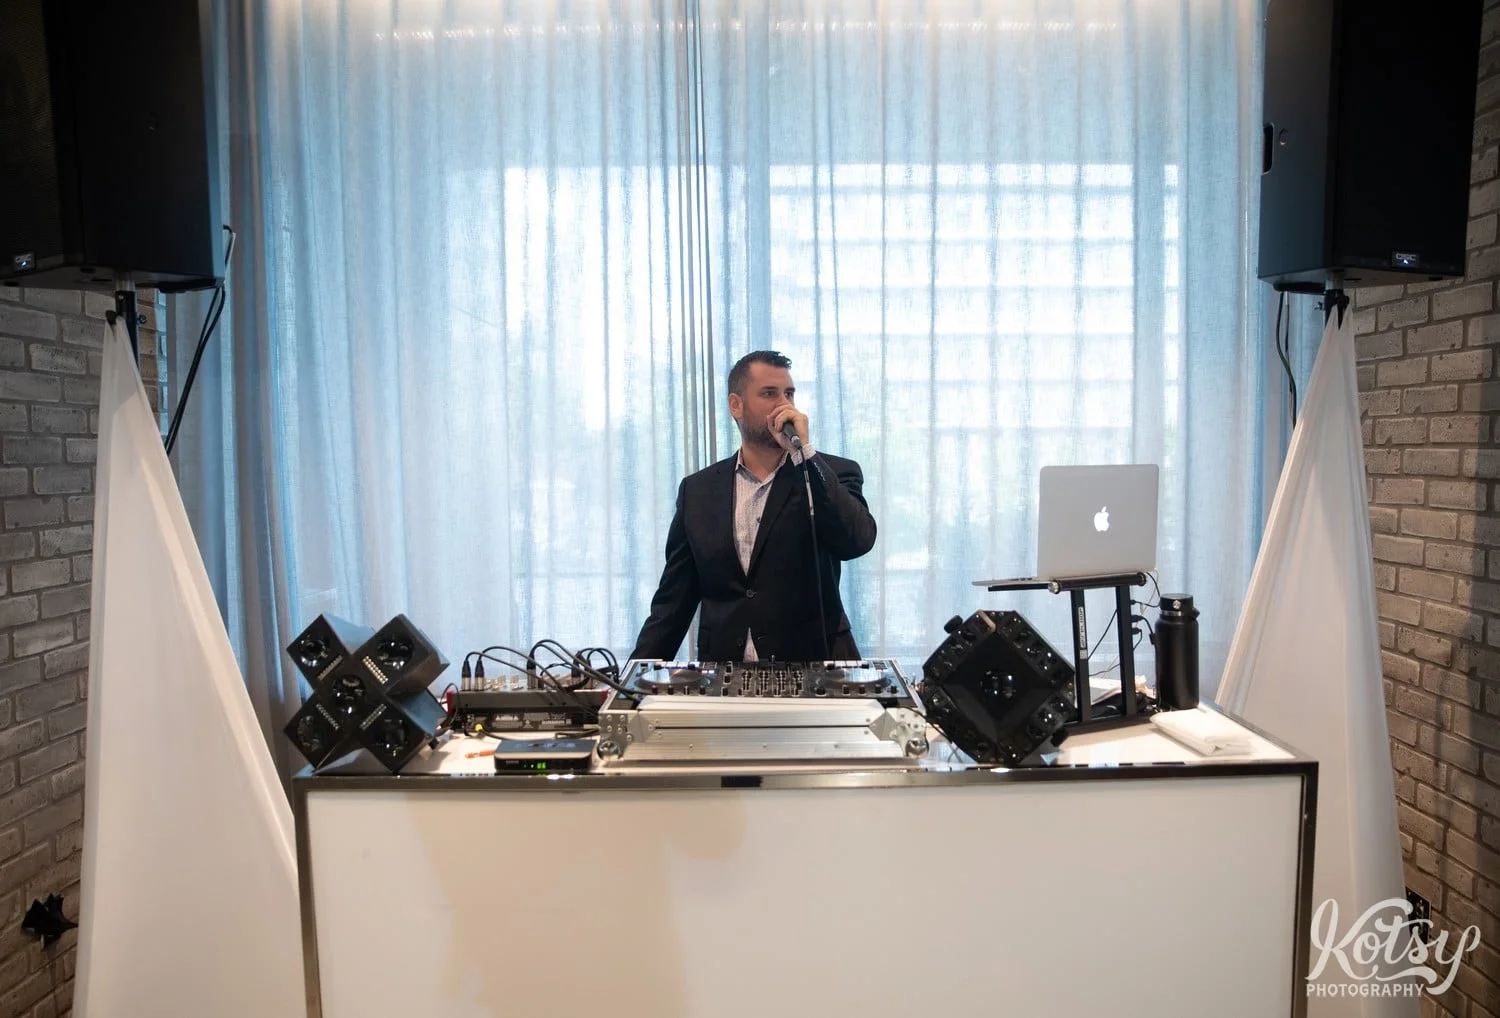 A DJ dressed in a black suit talks into a microphone during a Village Loft wedding reception in Toronto, Canada